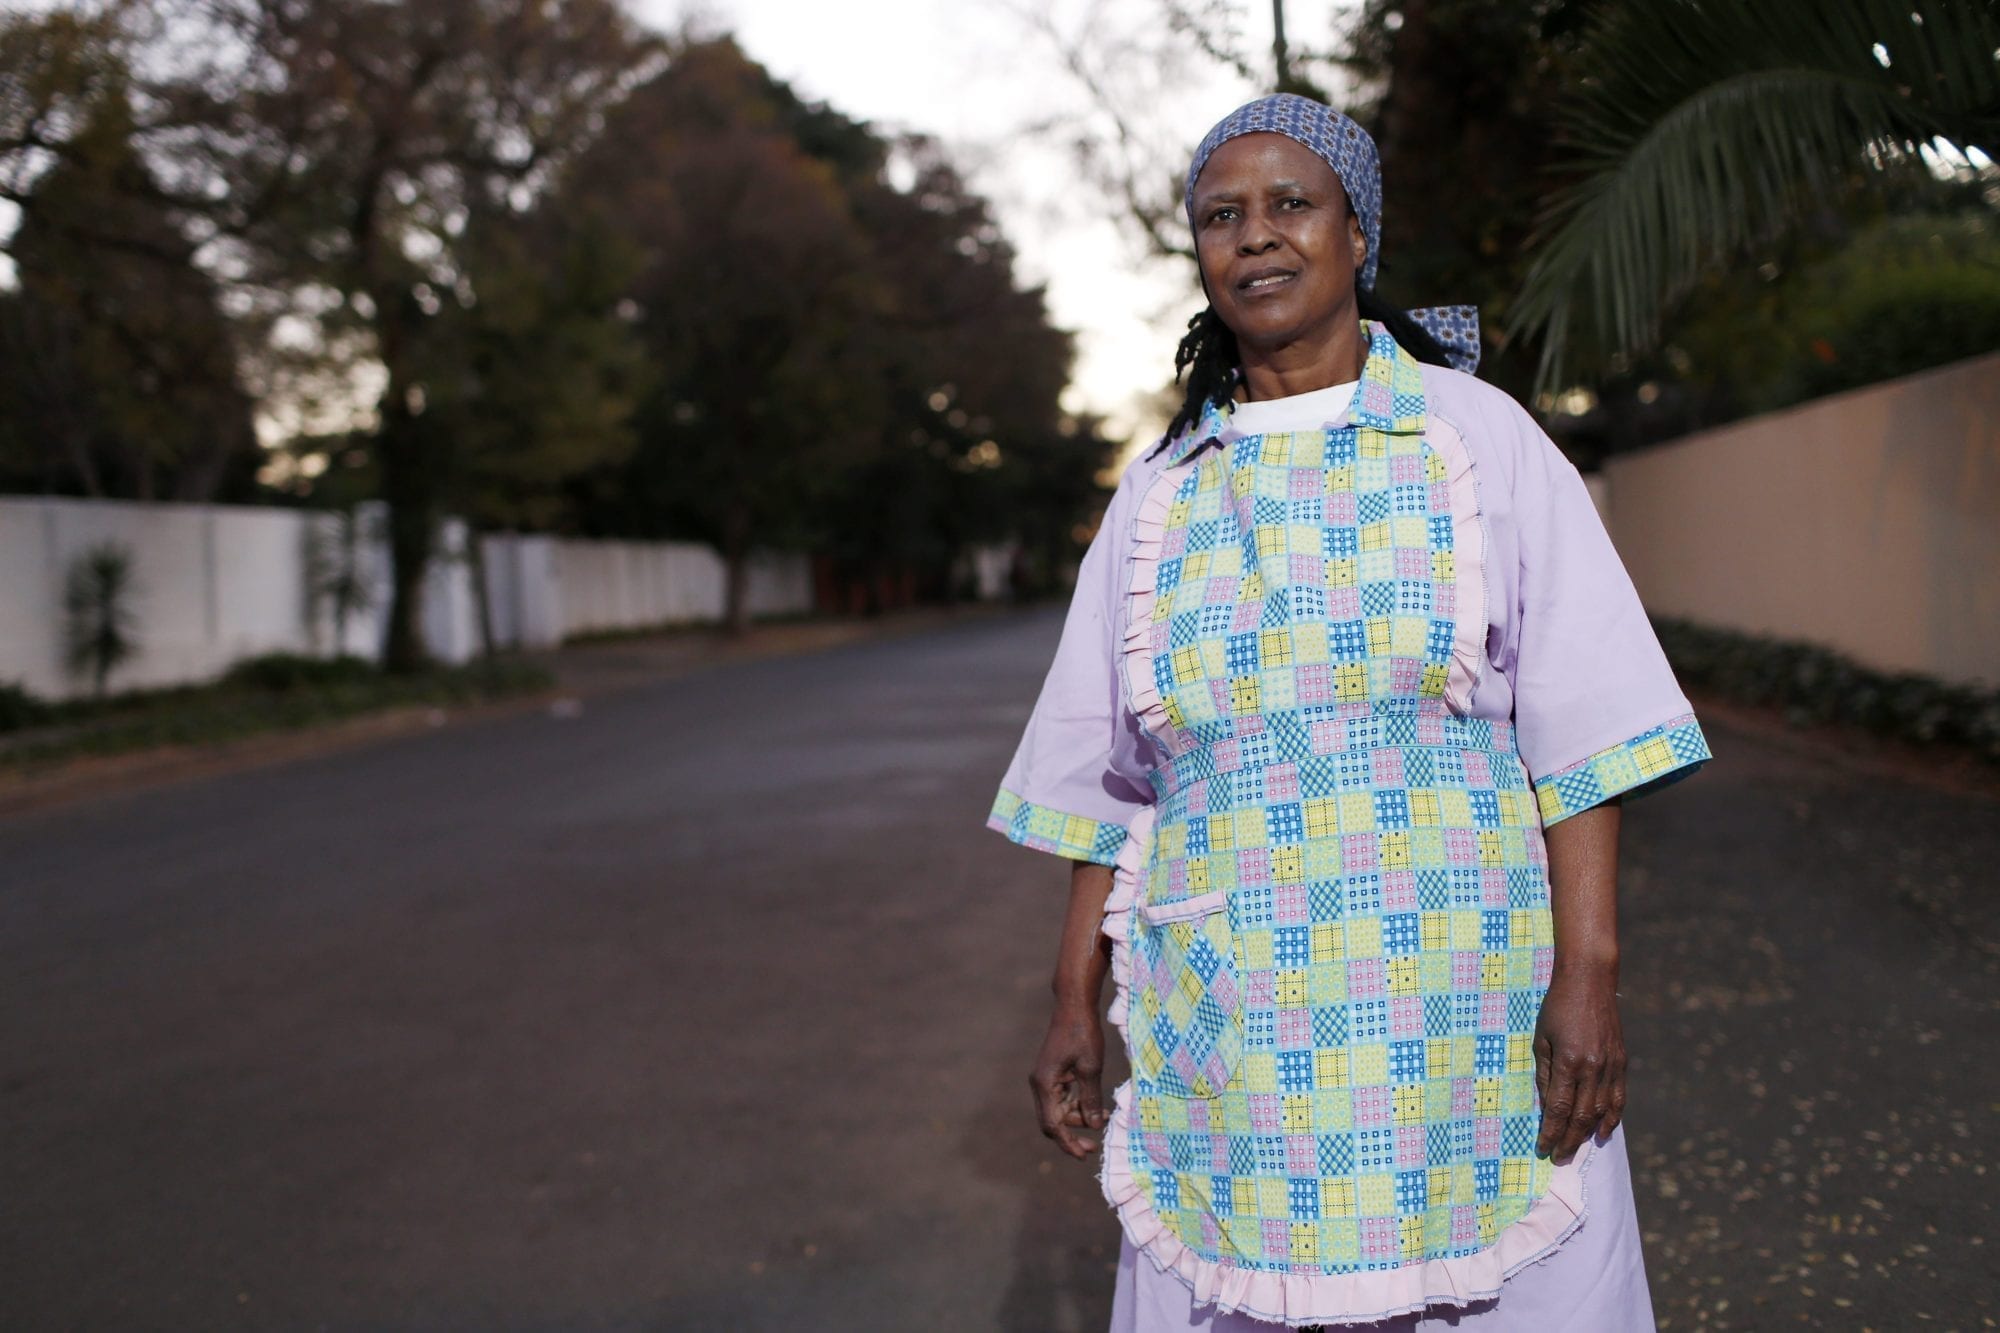 South Africa domestic worker in Johannesburg